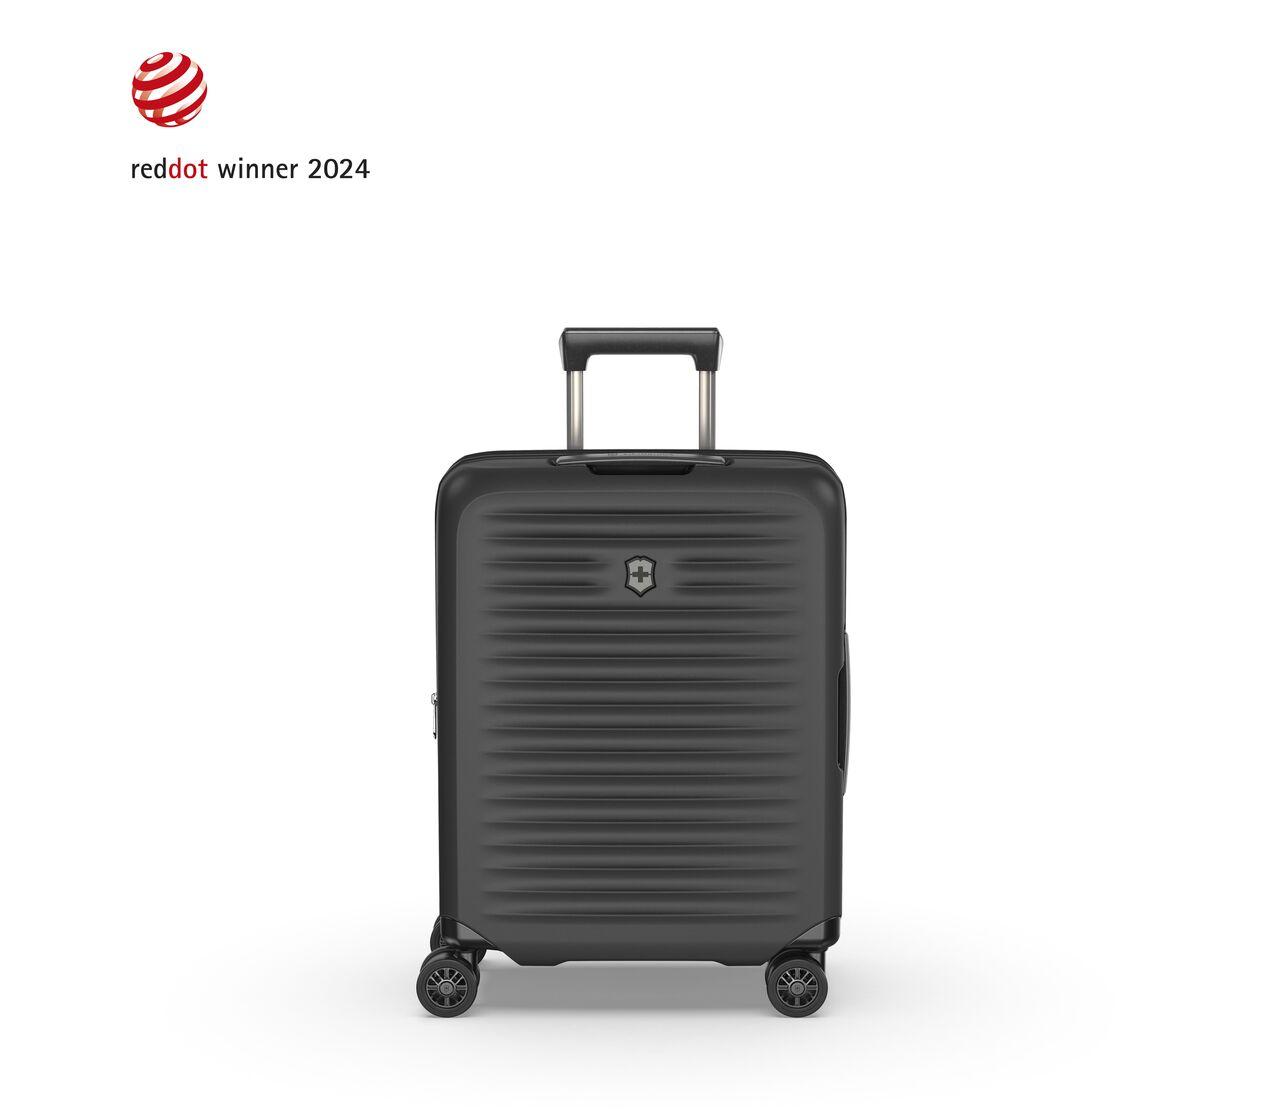 Airox Advanced Global Carry-on-612586